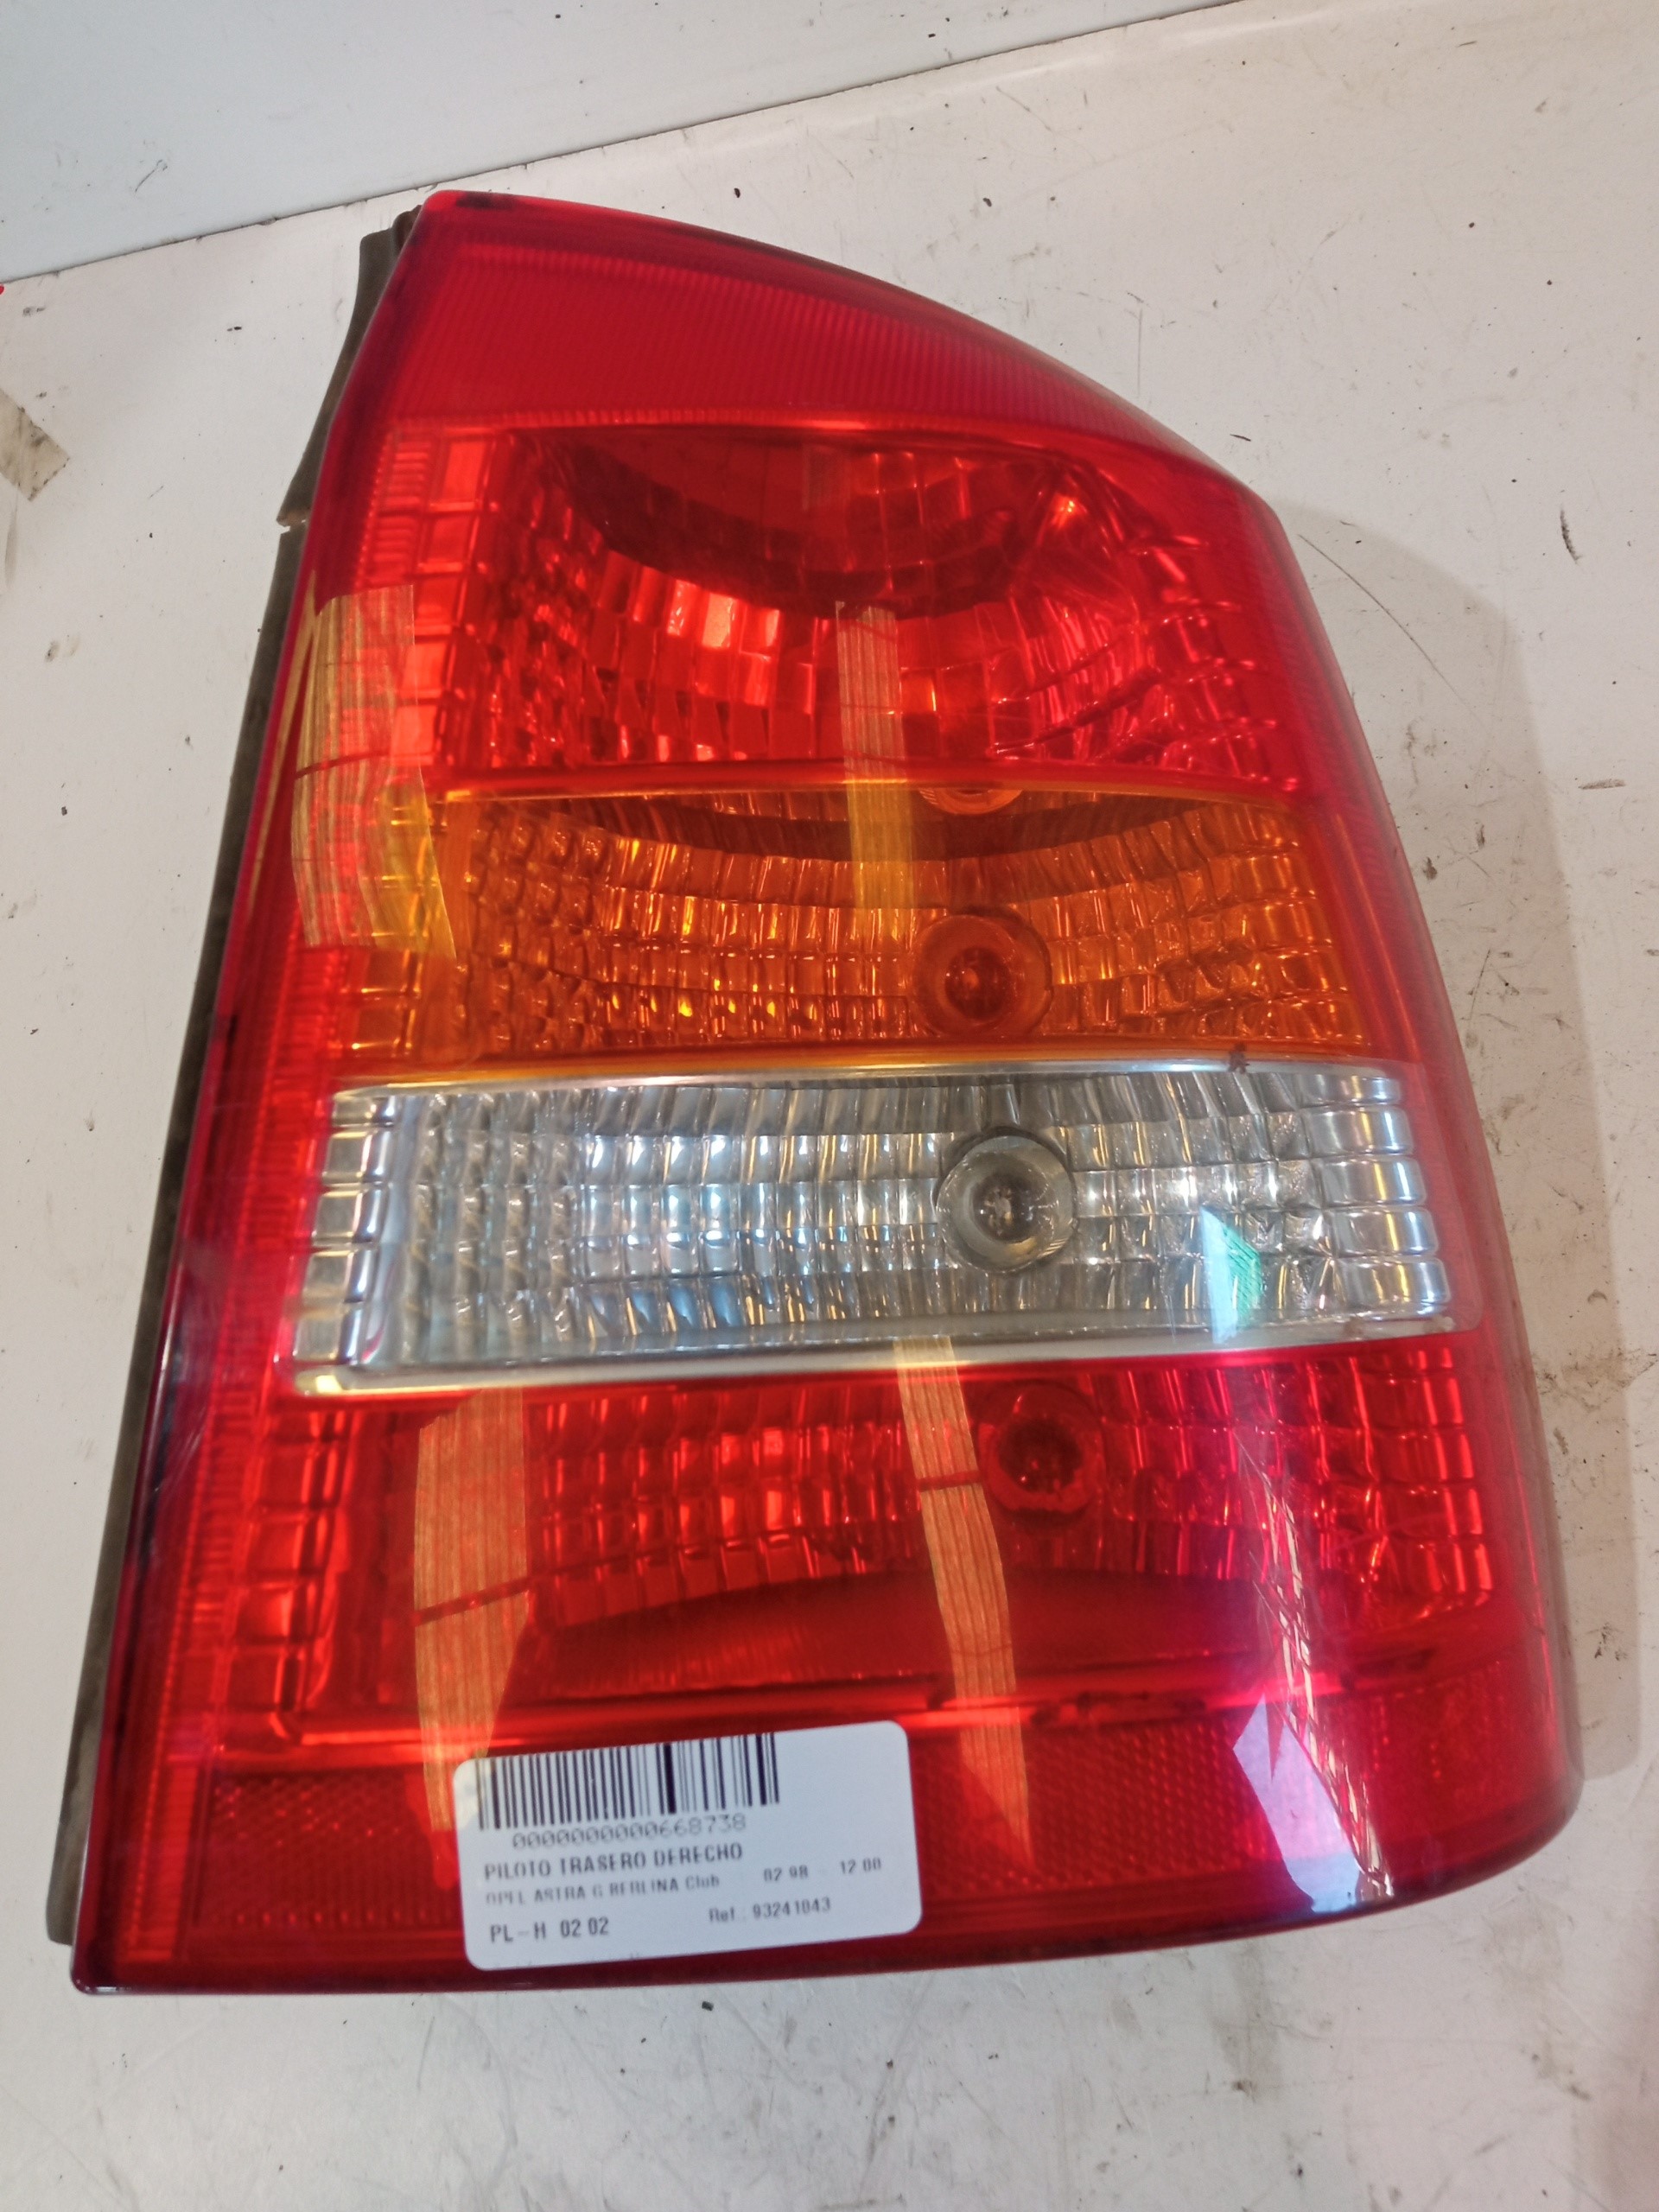 OPEL Astra H (2004-2014) Rear Right Taillight Lamp 93241043, 6PINES 25211101